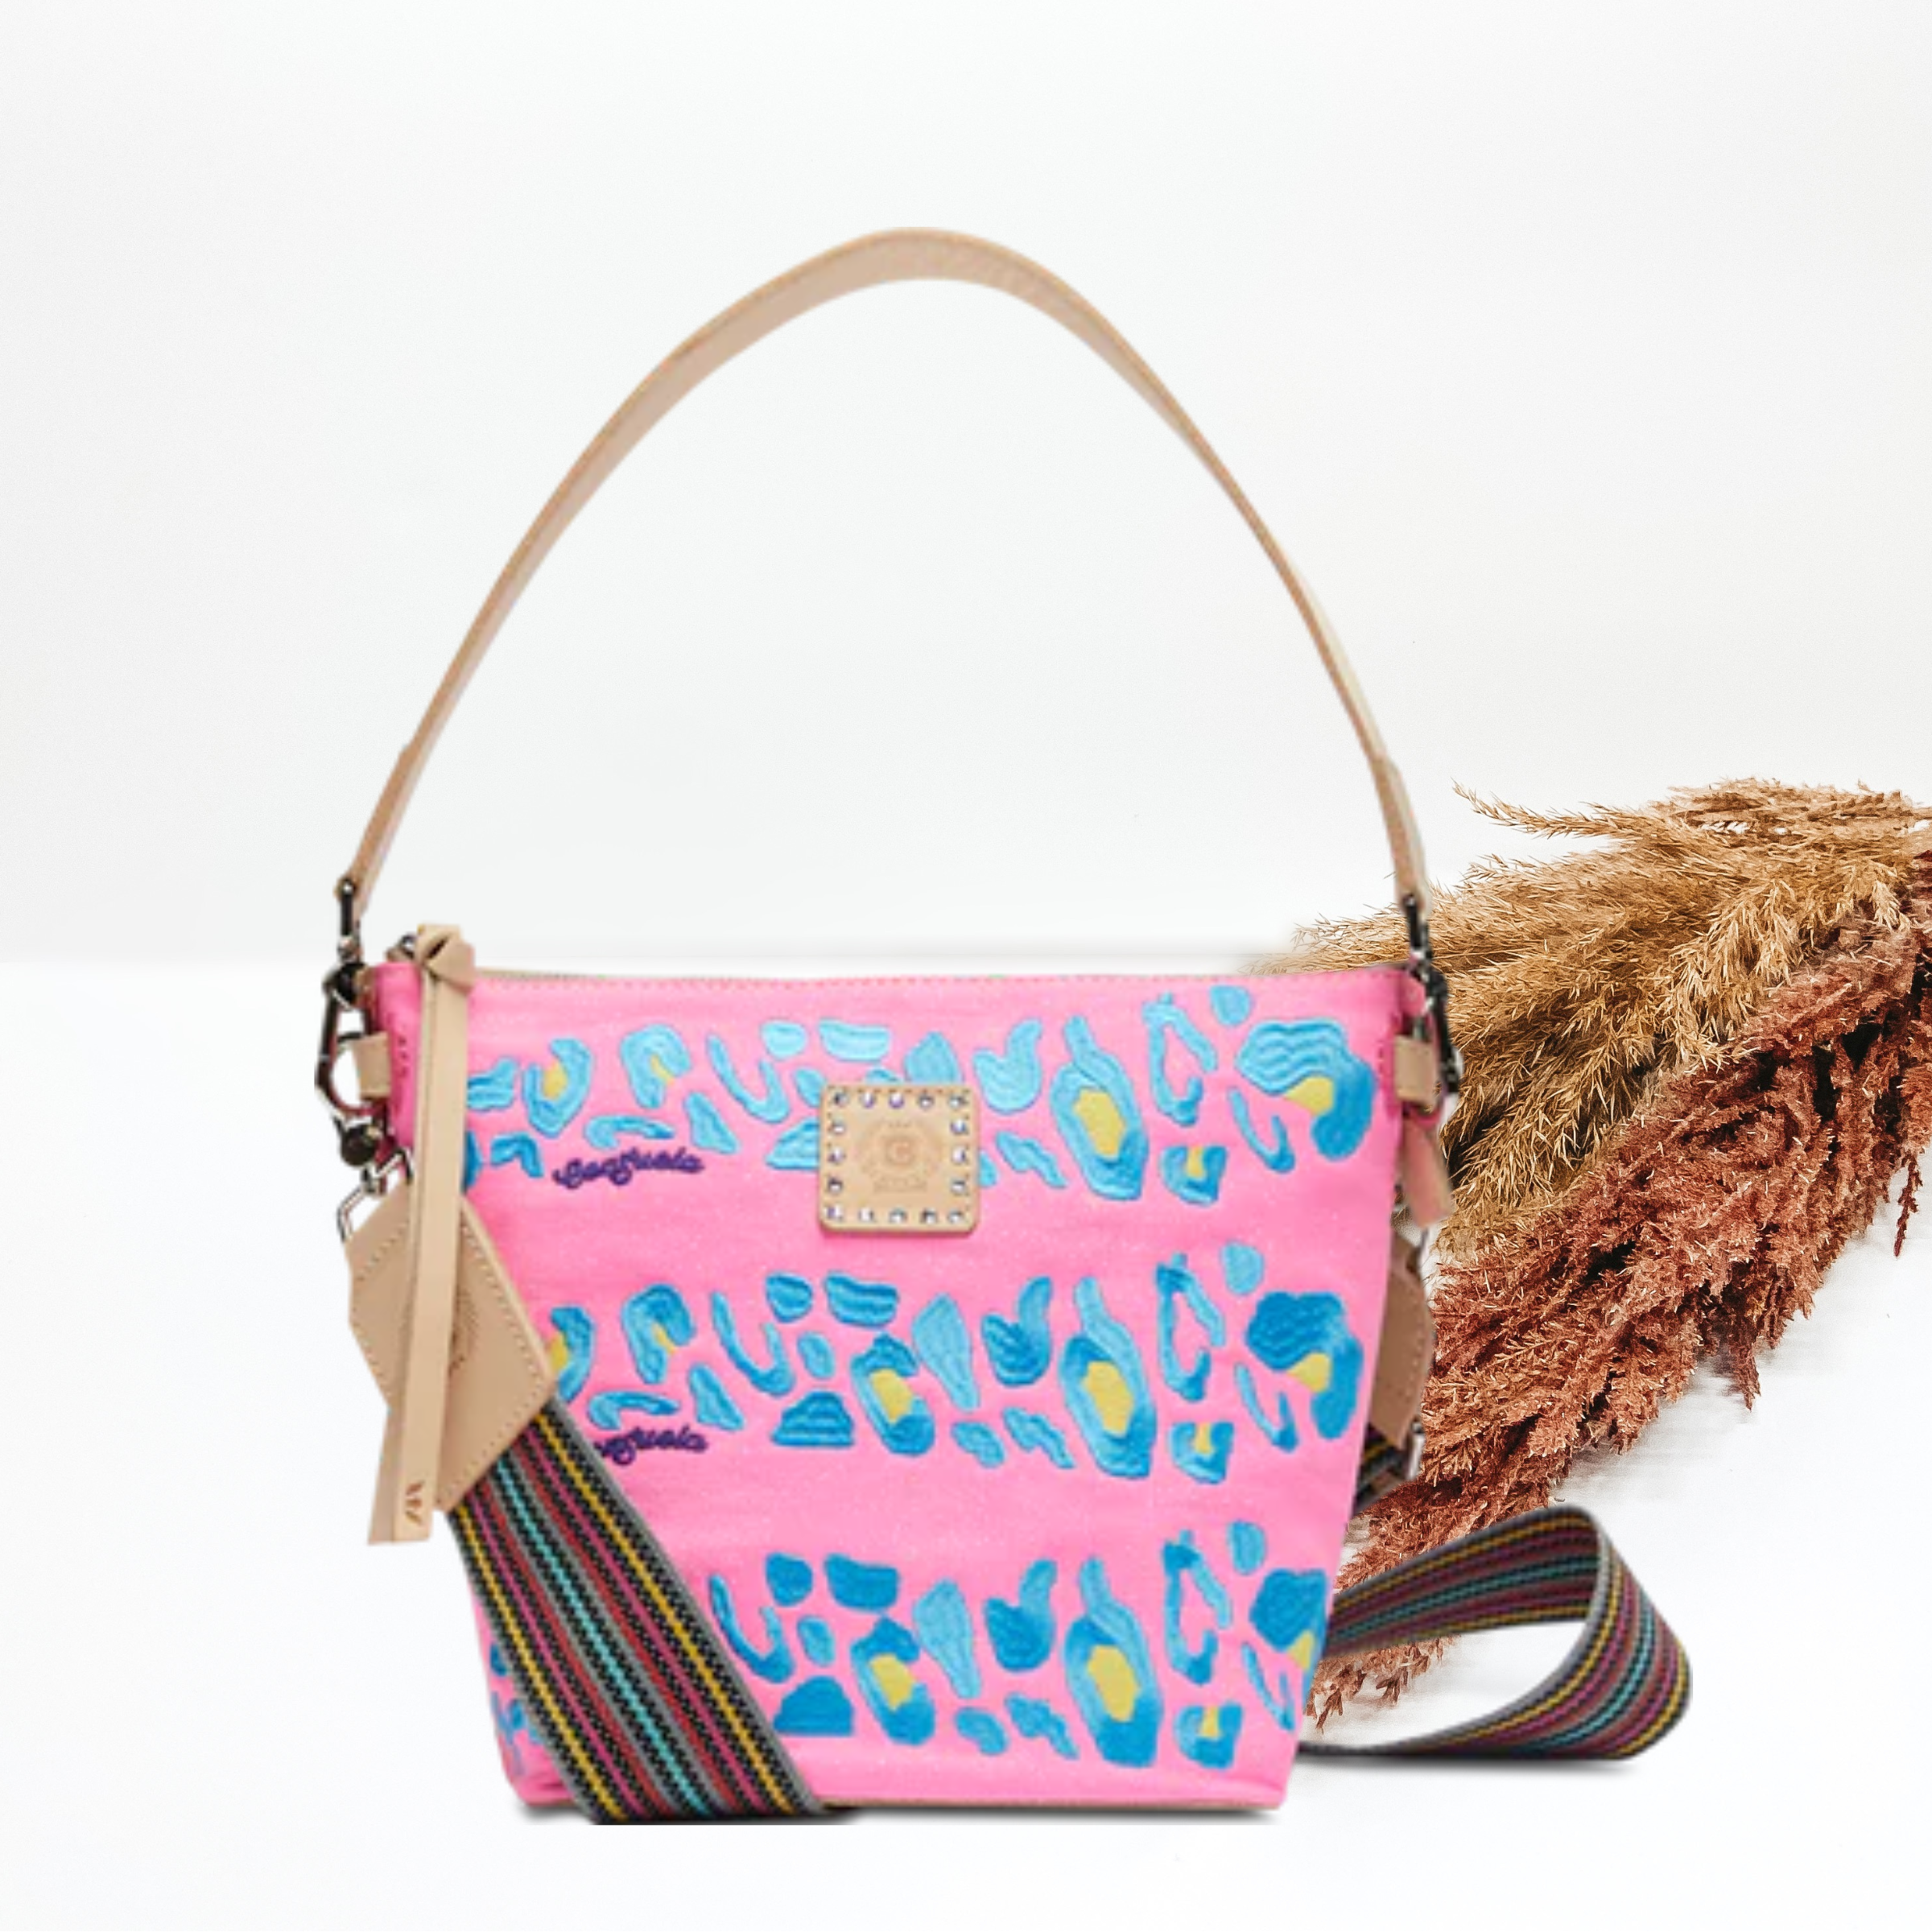 Pictured is a wedge purse in light pink with a light blue and yellow stiched leopard print pattern. This purse has a light tan short strap with a thick, striped longer purse strap This bag is pictured on a white background with pompous grass on the left side of the picture. 